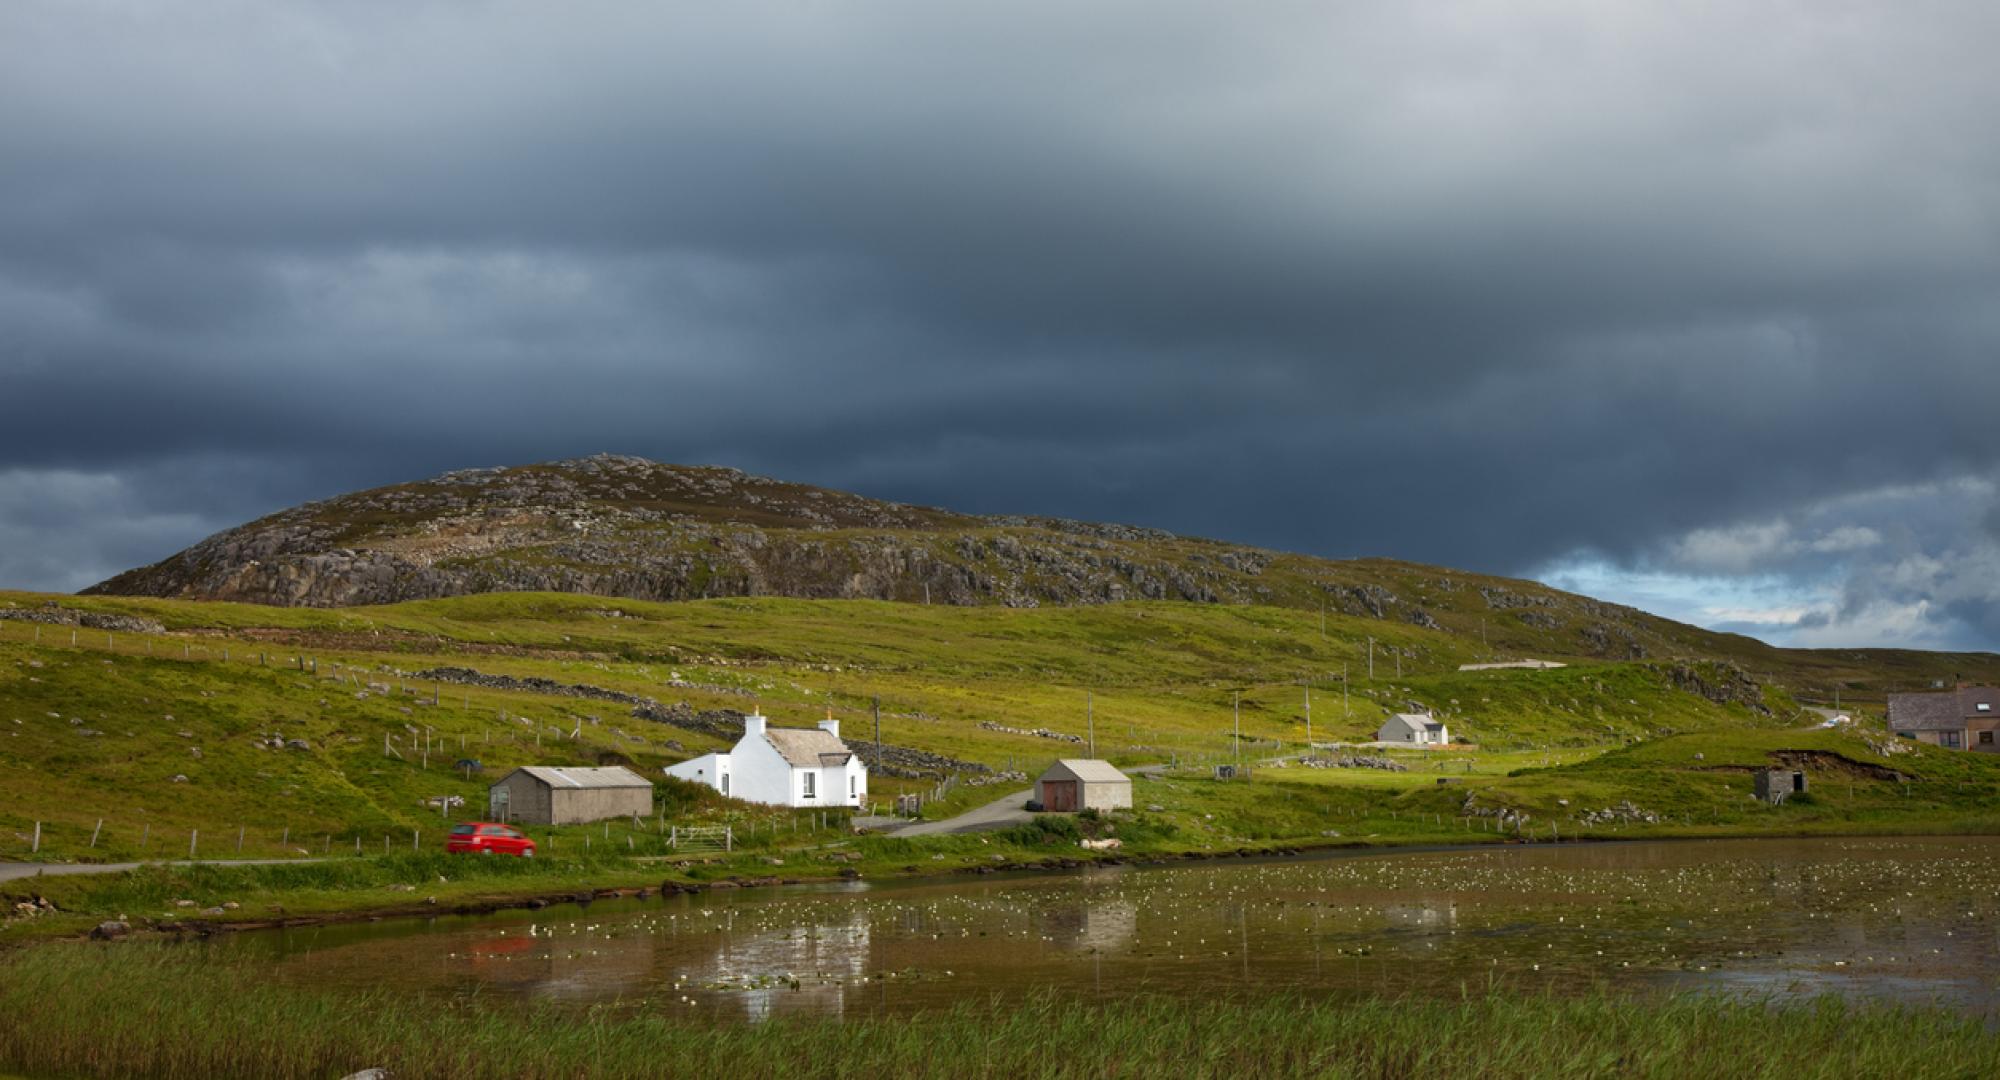 A croft in the Outer Hebrides of Scotland